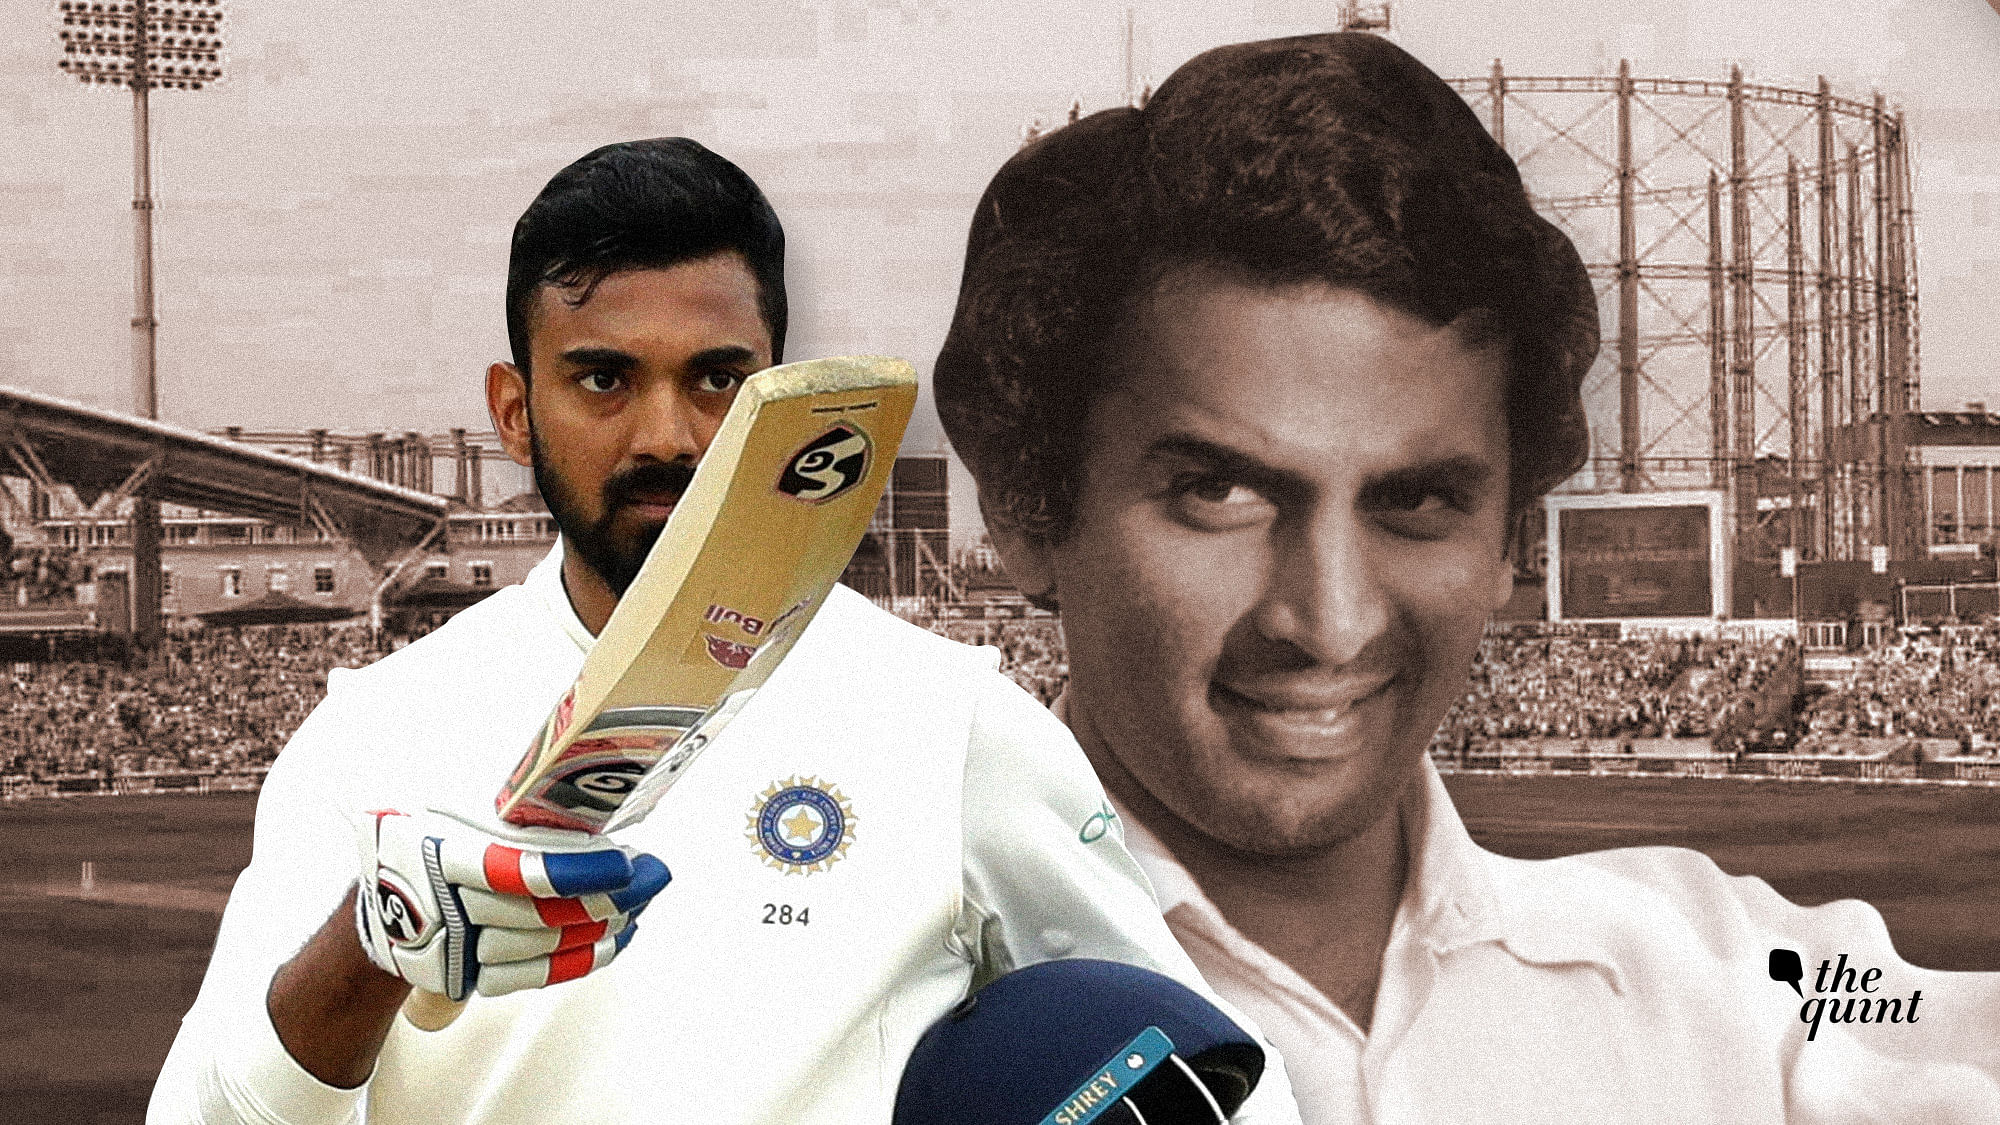 KL Rahul scored a 149 at the Oval while Sunil Gavaskar finished with 221 at the same venue in 1979.